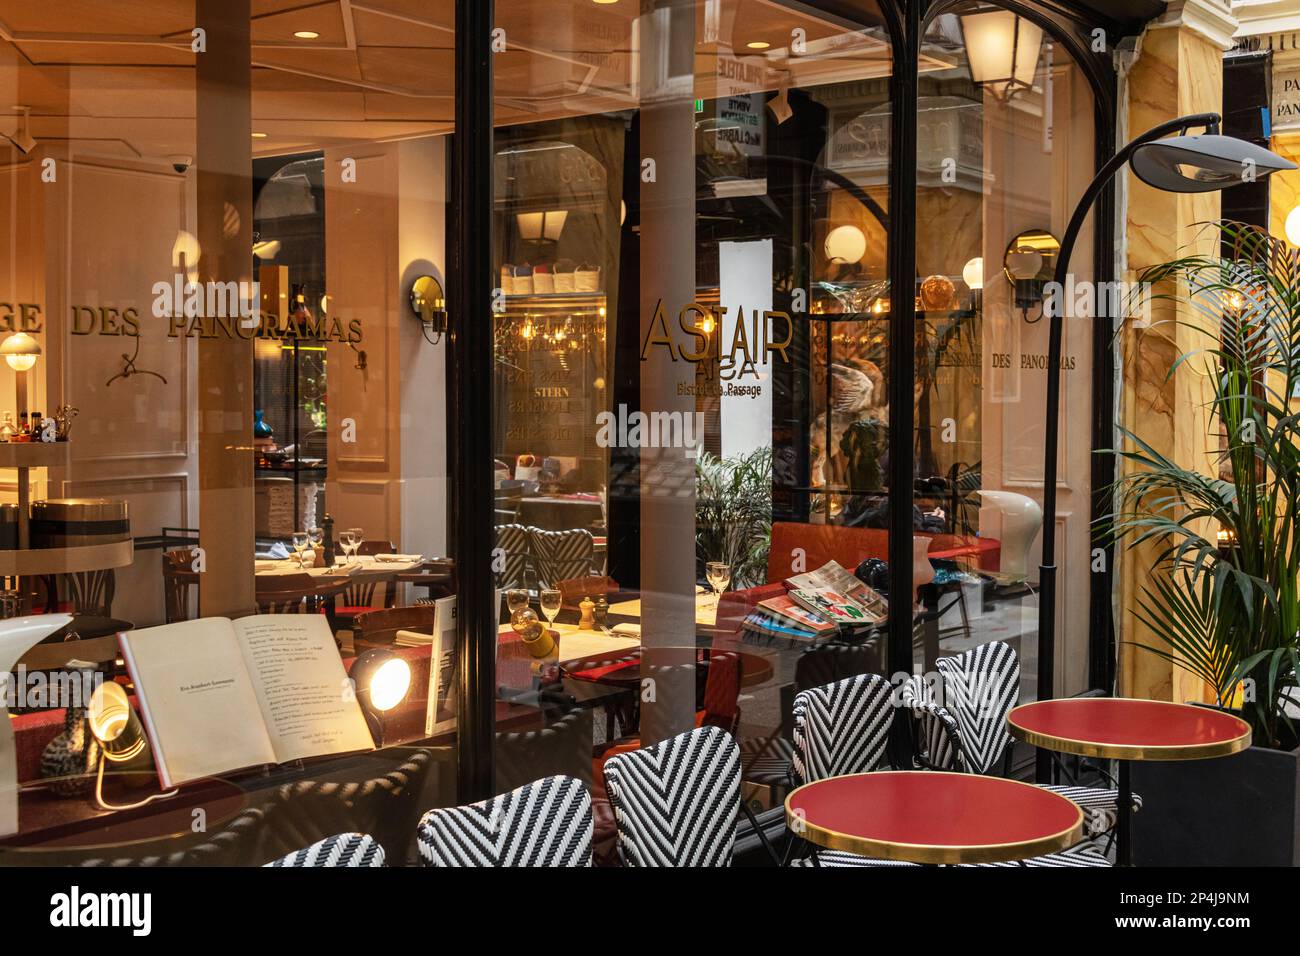 Restaurant Astair in the Passage des Panoramas in the 2nd Arrondissement Paris. Stock Photo